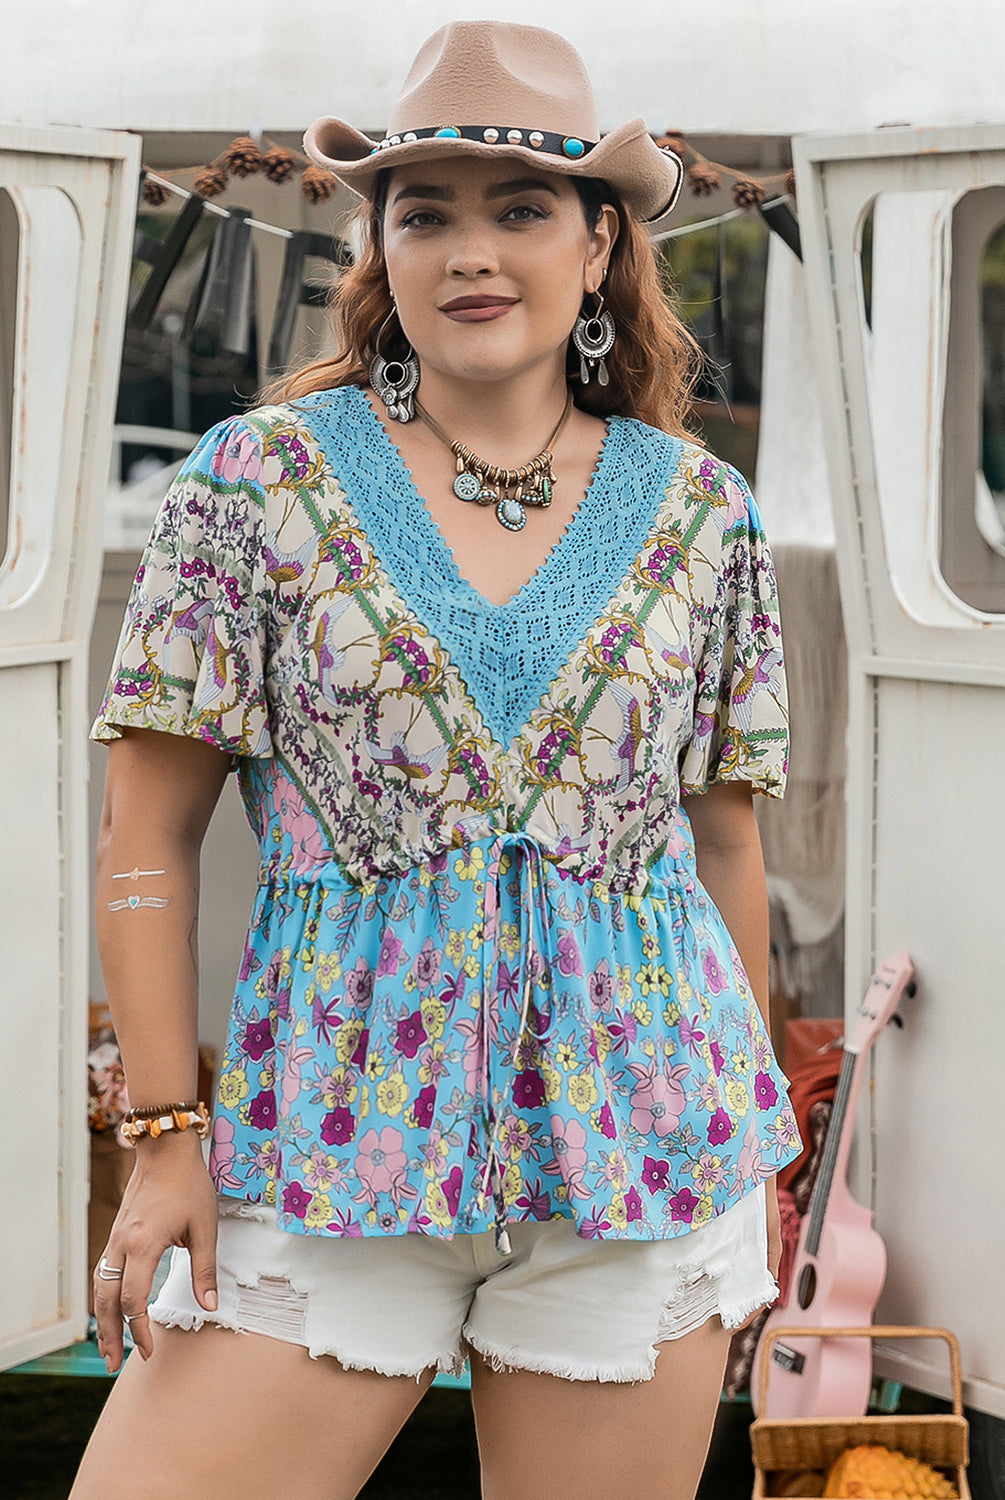 Confident woman sporting a colorful plus size blouse with floral and lace detail